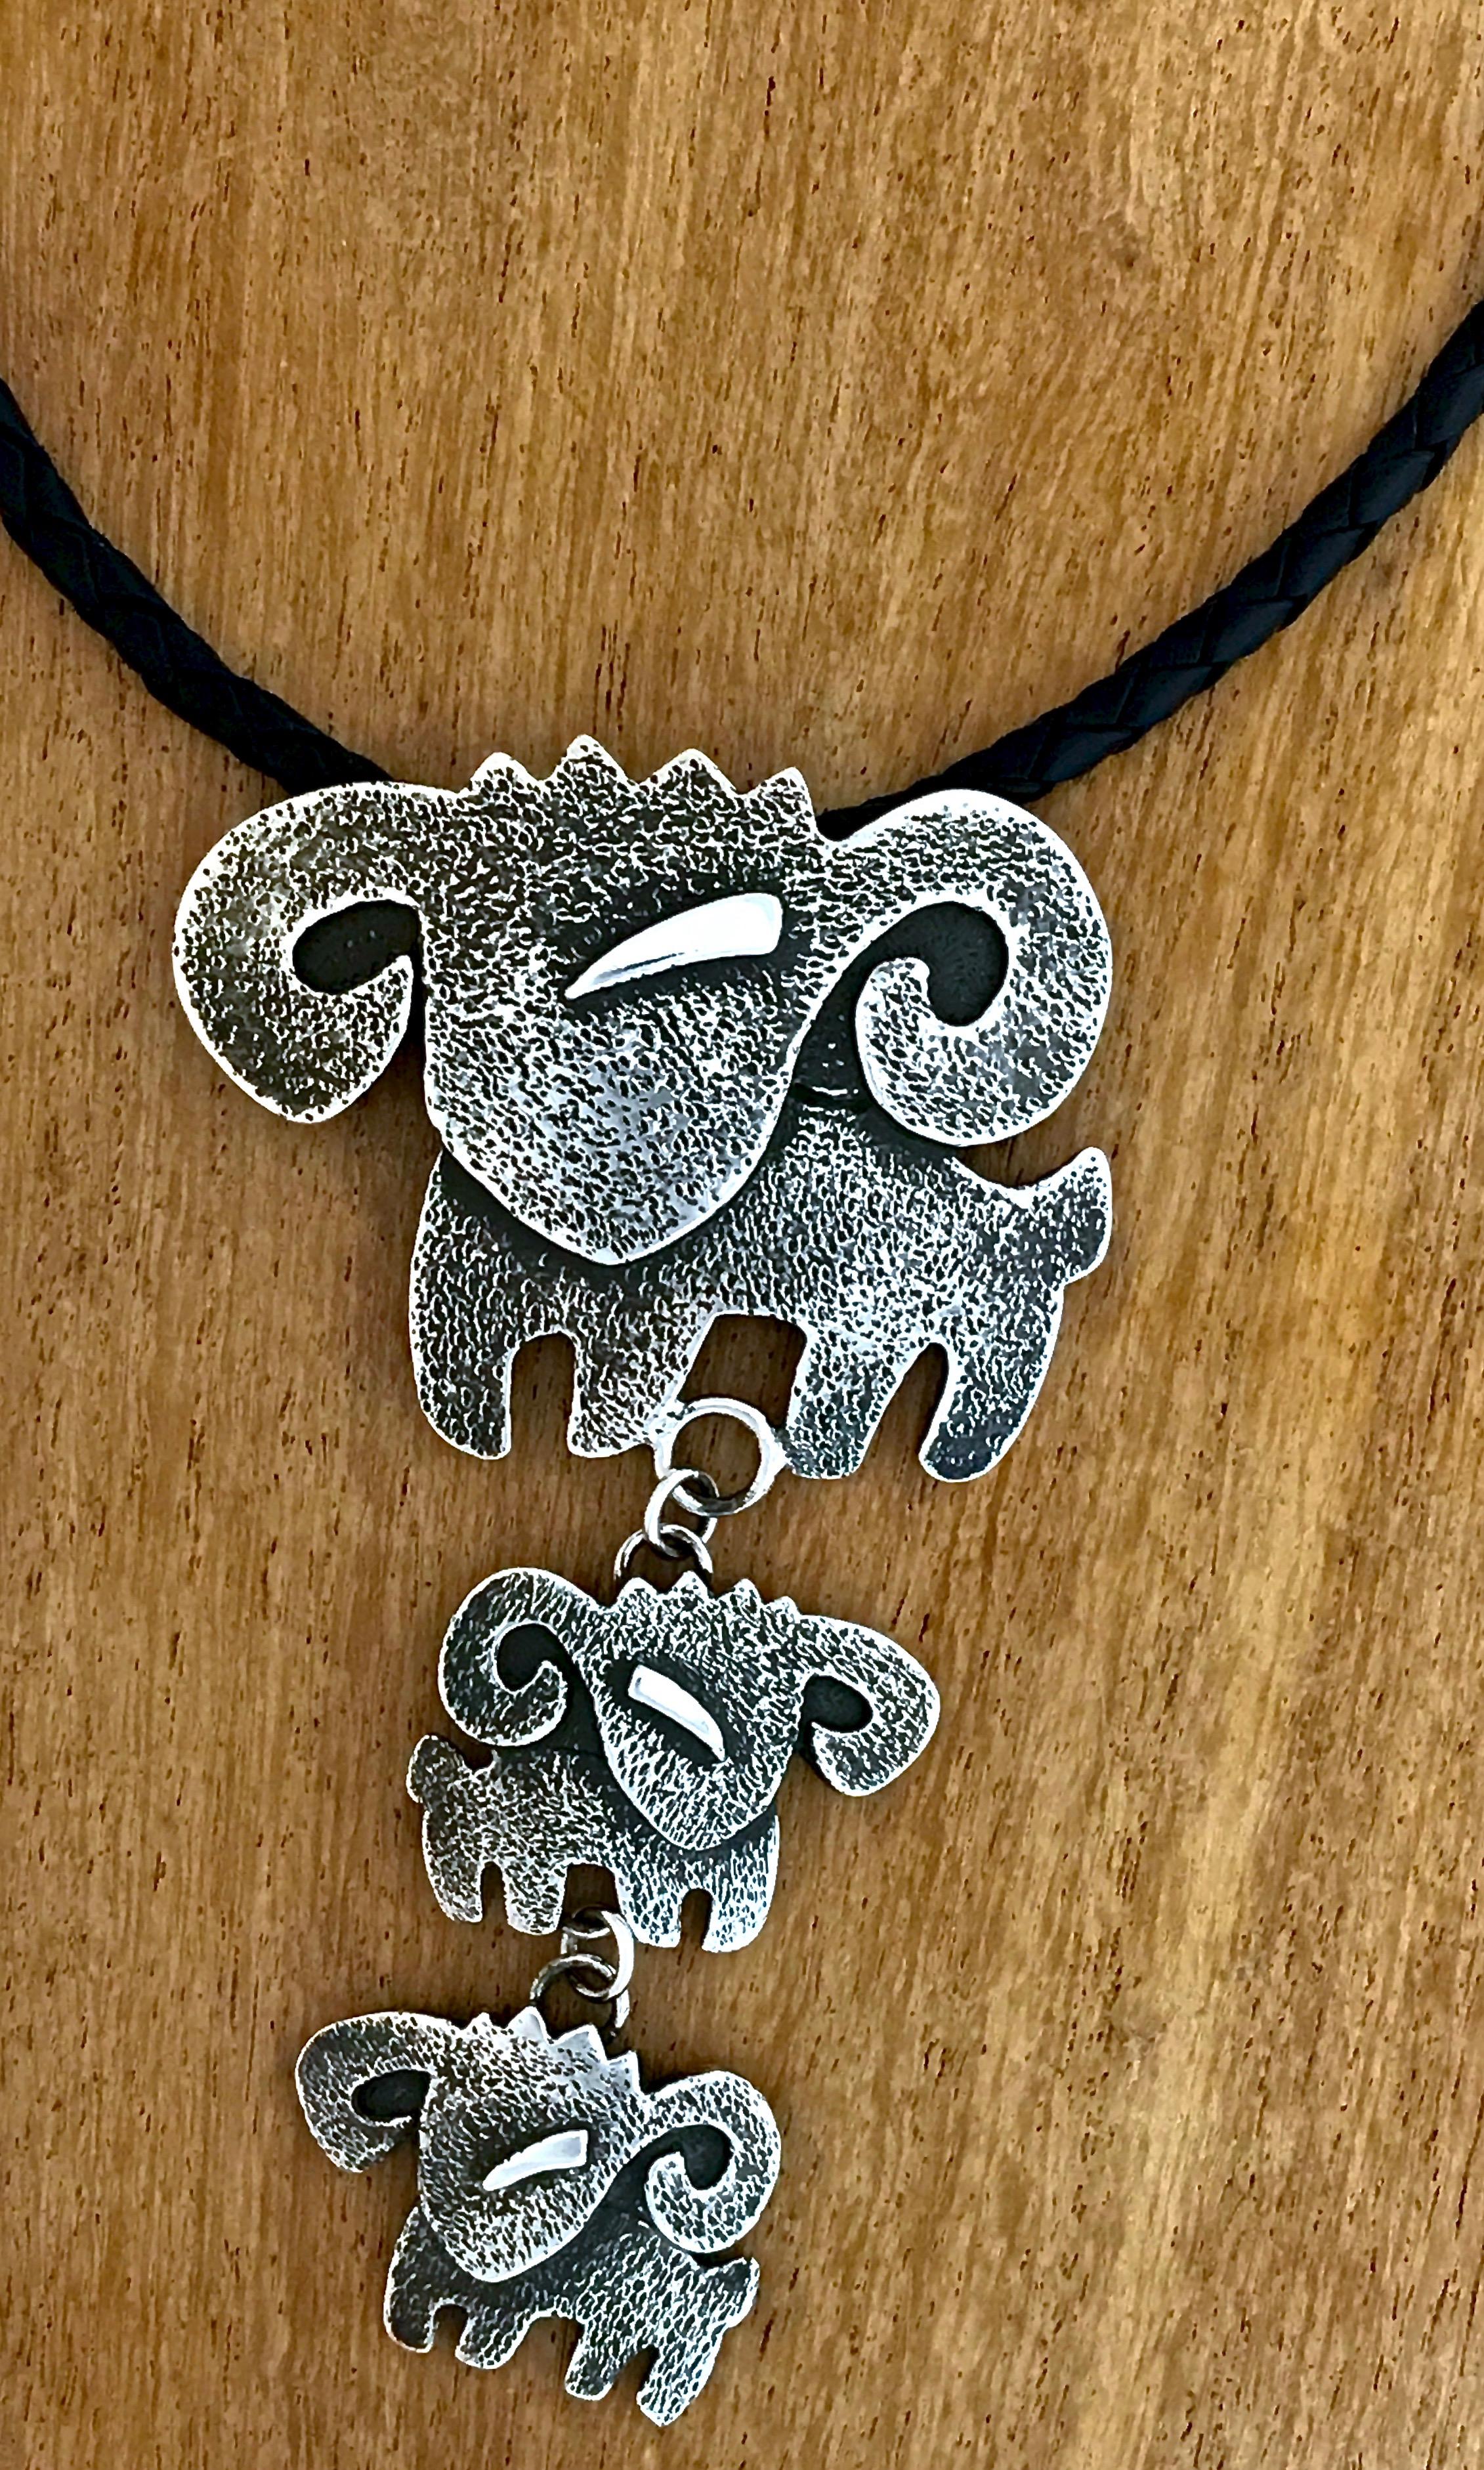 Contemporary Ram drop pendant, by Melanie Yazzie, cast, sterling silver, Navajo, necklace For Sale